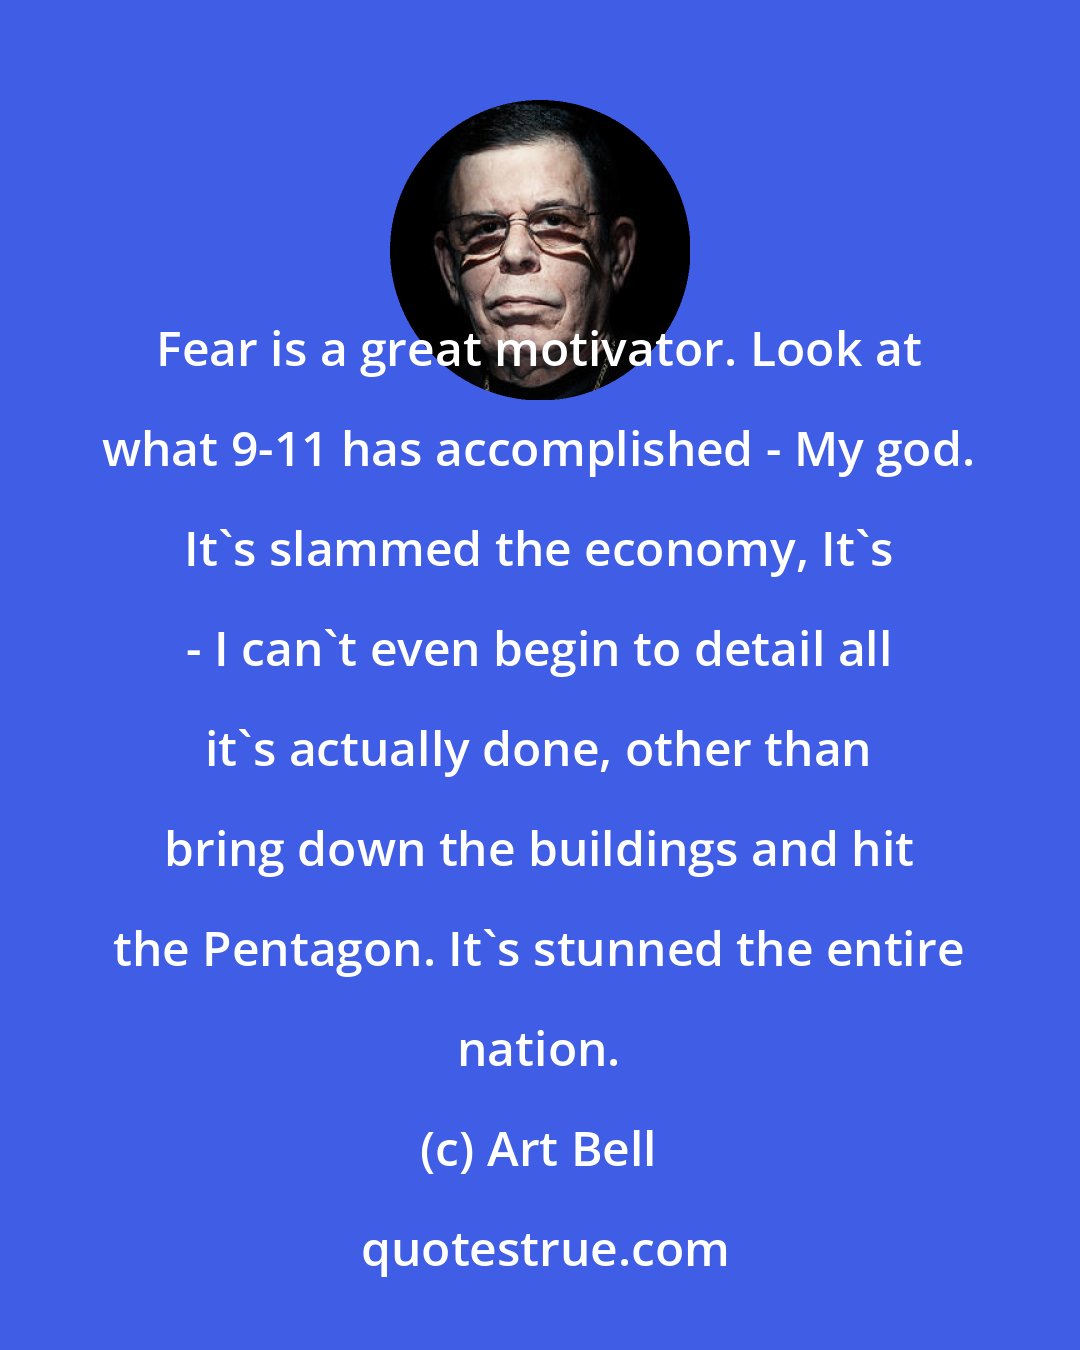 Art Bell: Fear is a great motivator. Look at what 9-11 has accomplished - My god. It's slammed the economy, It's - I can't even begin to detail all it's actually done, other than bring down the buildings and hit the Pentagon. It's stunned the entire nation.